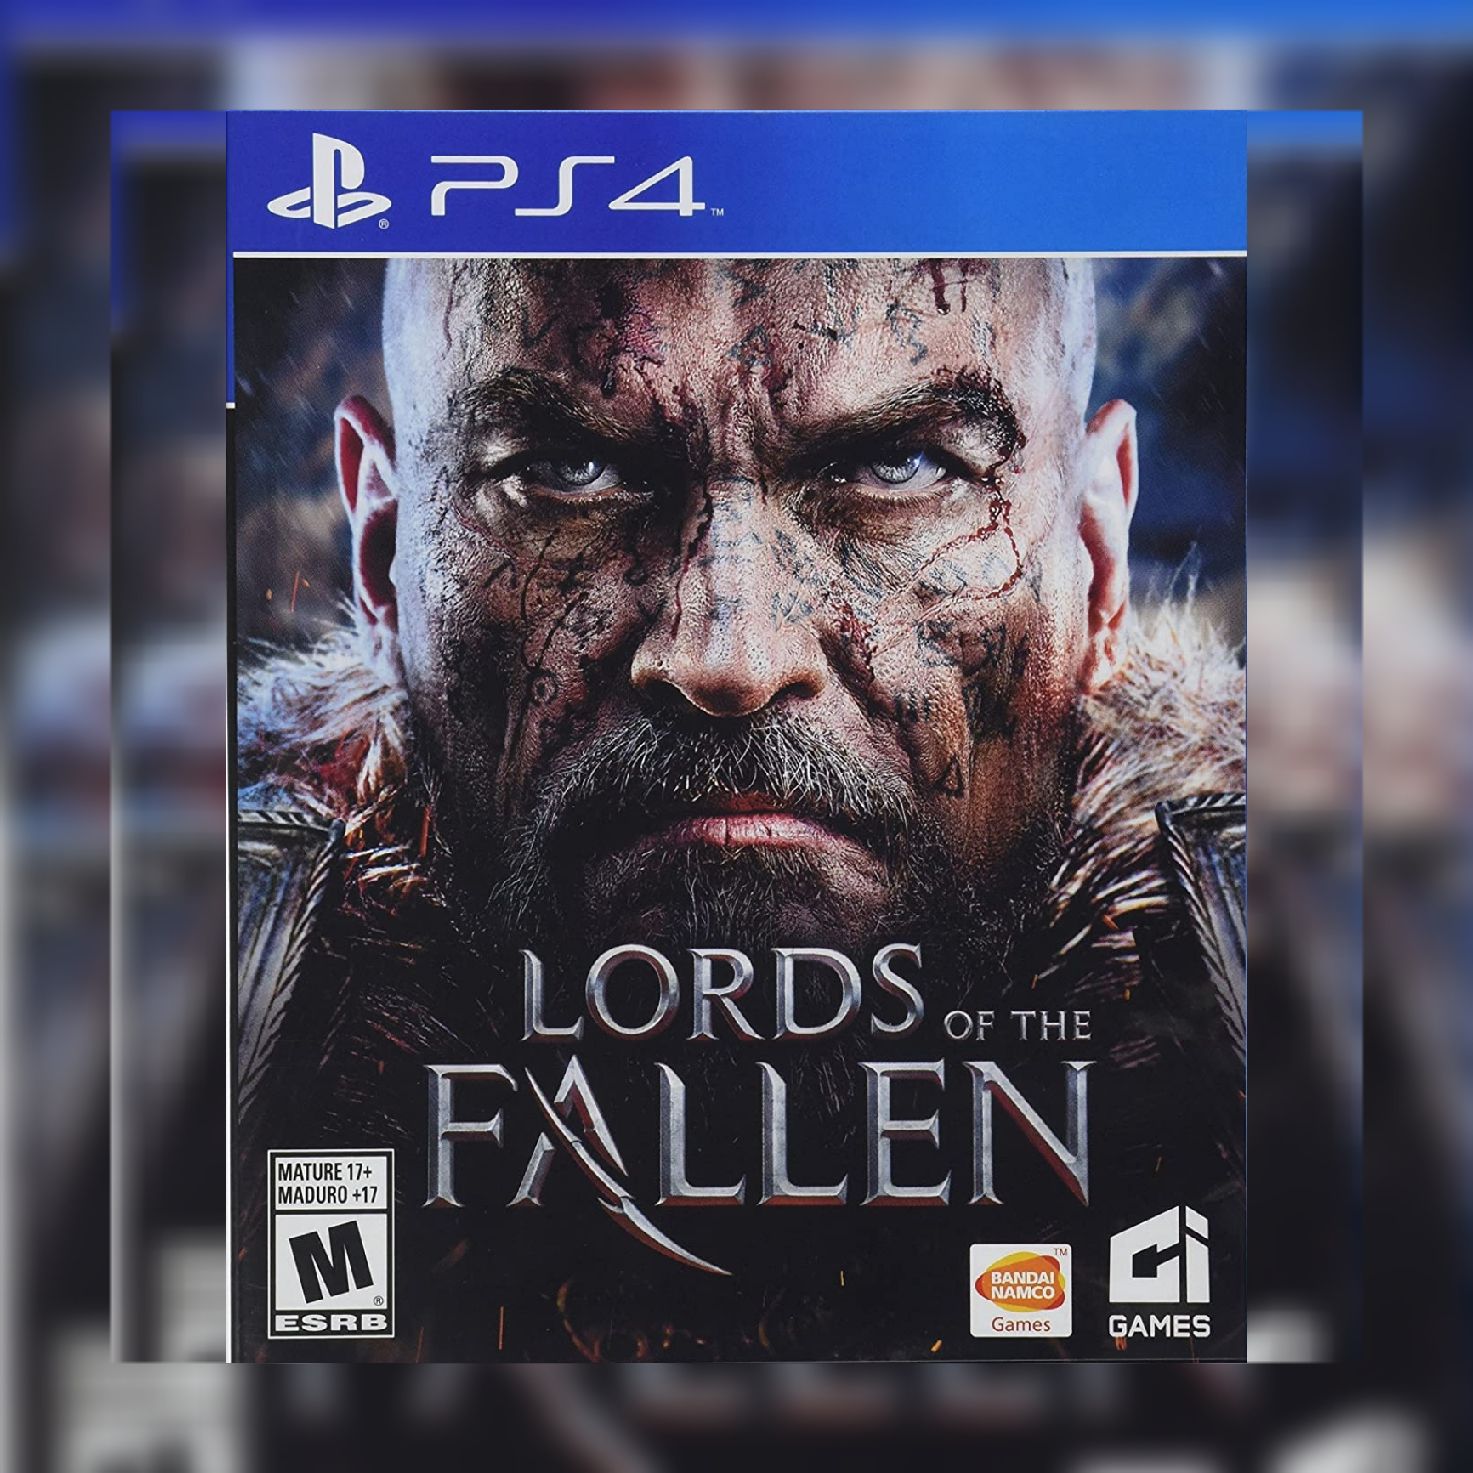  Lords of the Fallen - PlayStation 4 : Namco: Video Games